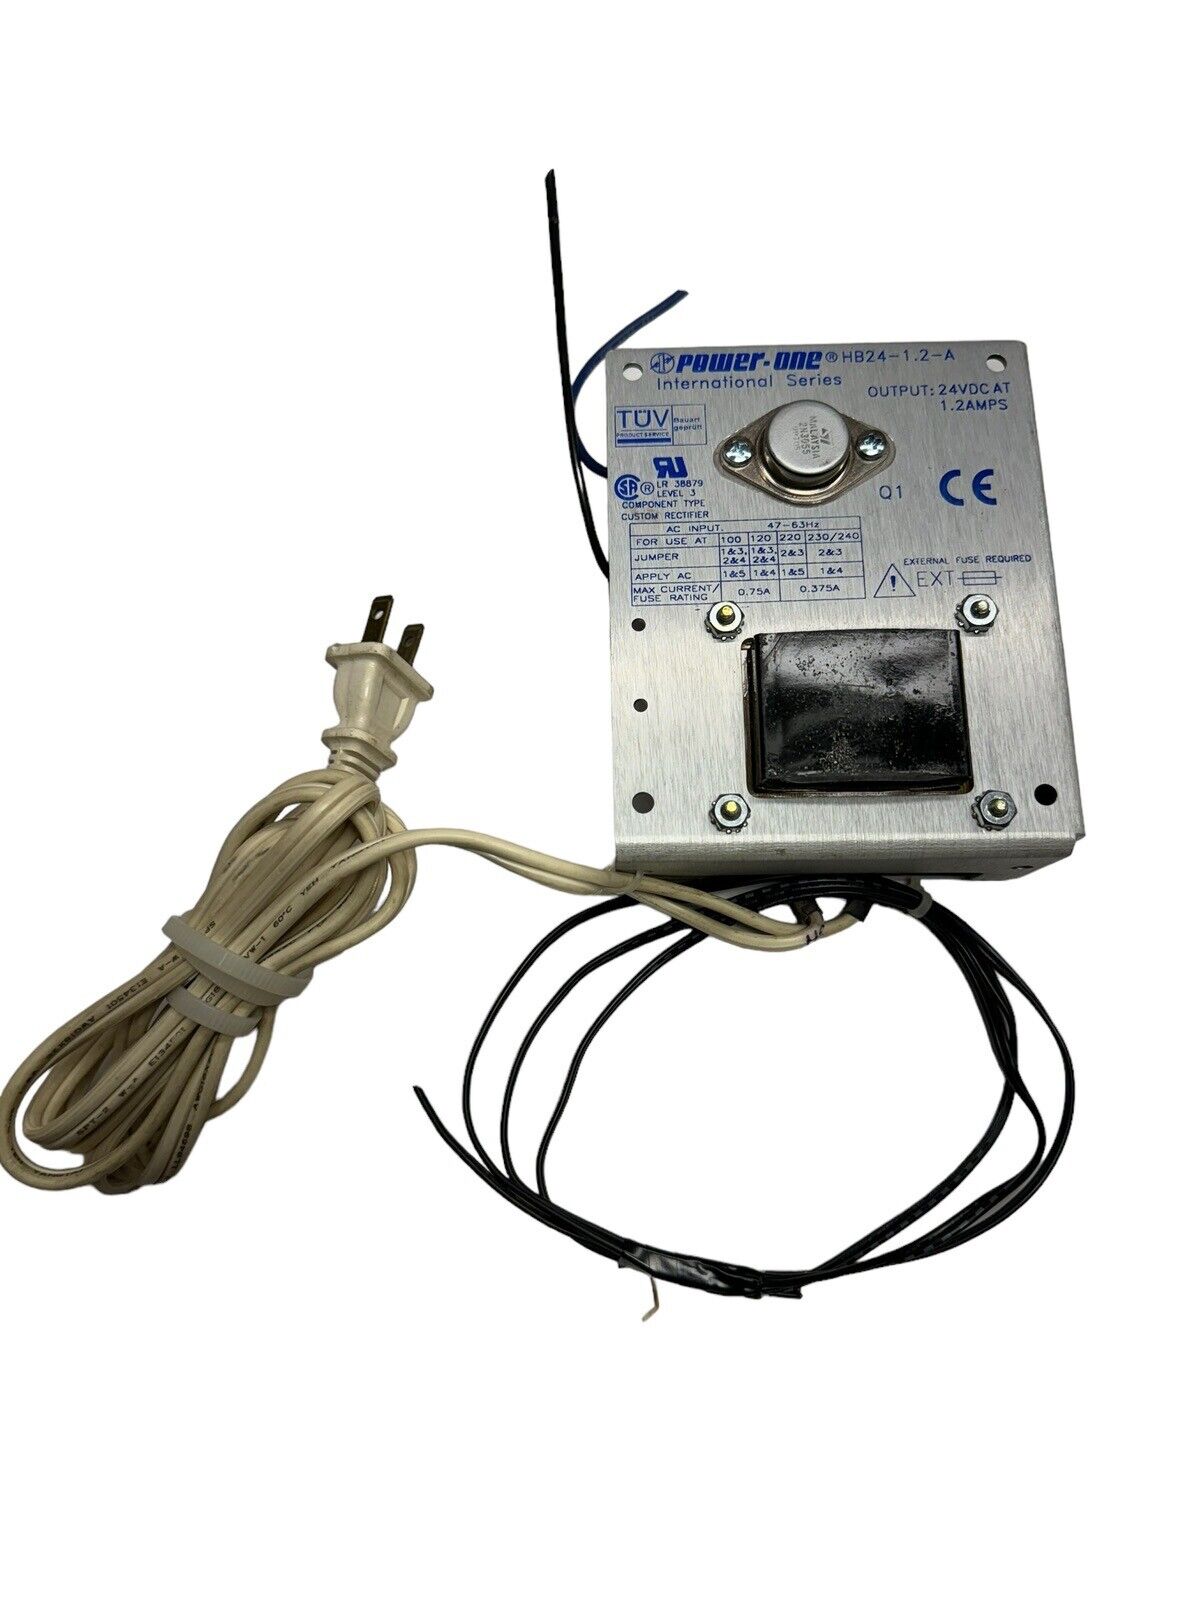 Power-One International Series HB24-1.2-A Power Supply - 24VDC @ 1.2A, Level 3